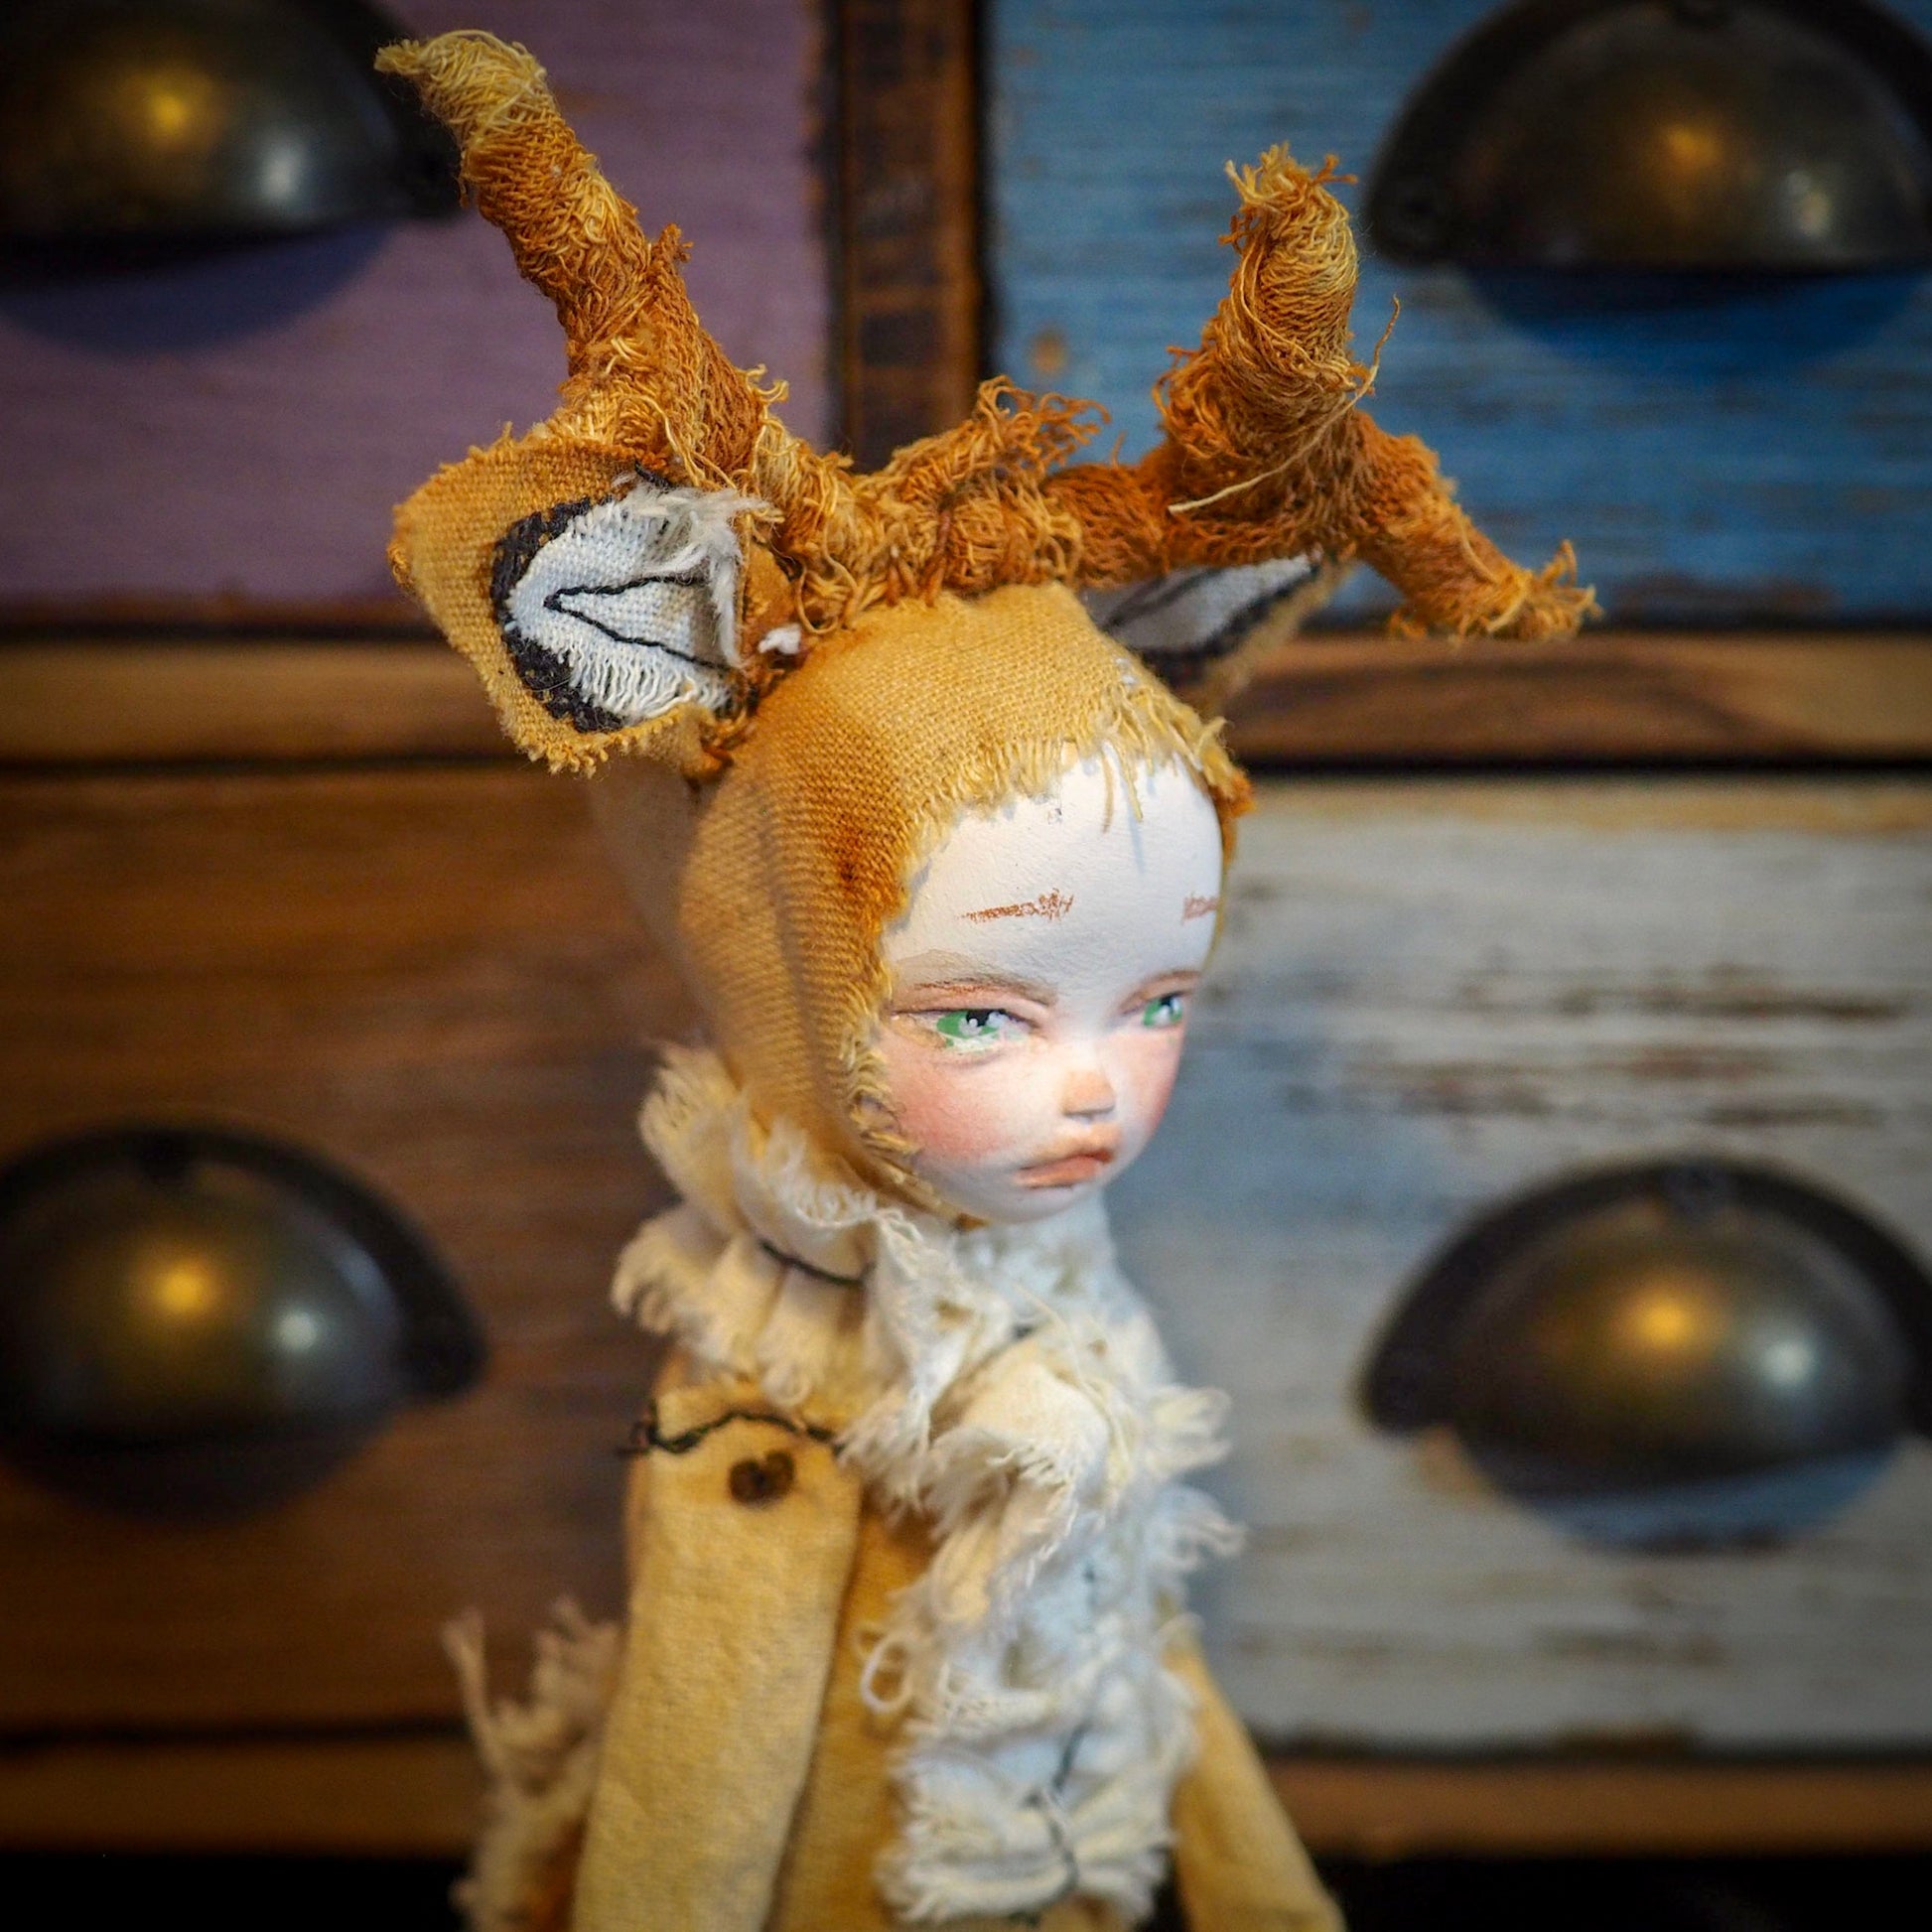 THE DEER - An original handmade doll by Danita Art, made with original patterns, organic fabric dyed using only natural ingredients like avocado peels, walnuts and marigolds. Each mini art doll in this toy collection is a mini work of huggable fabric art to be treasured by any collector of Danita's melancholic and fantastic work.